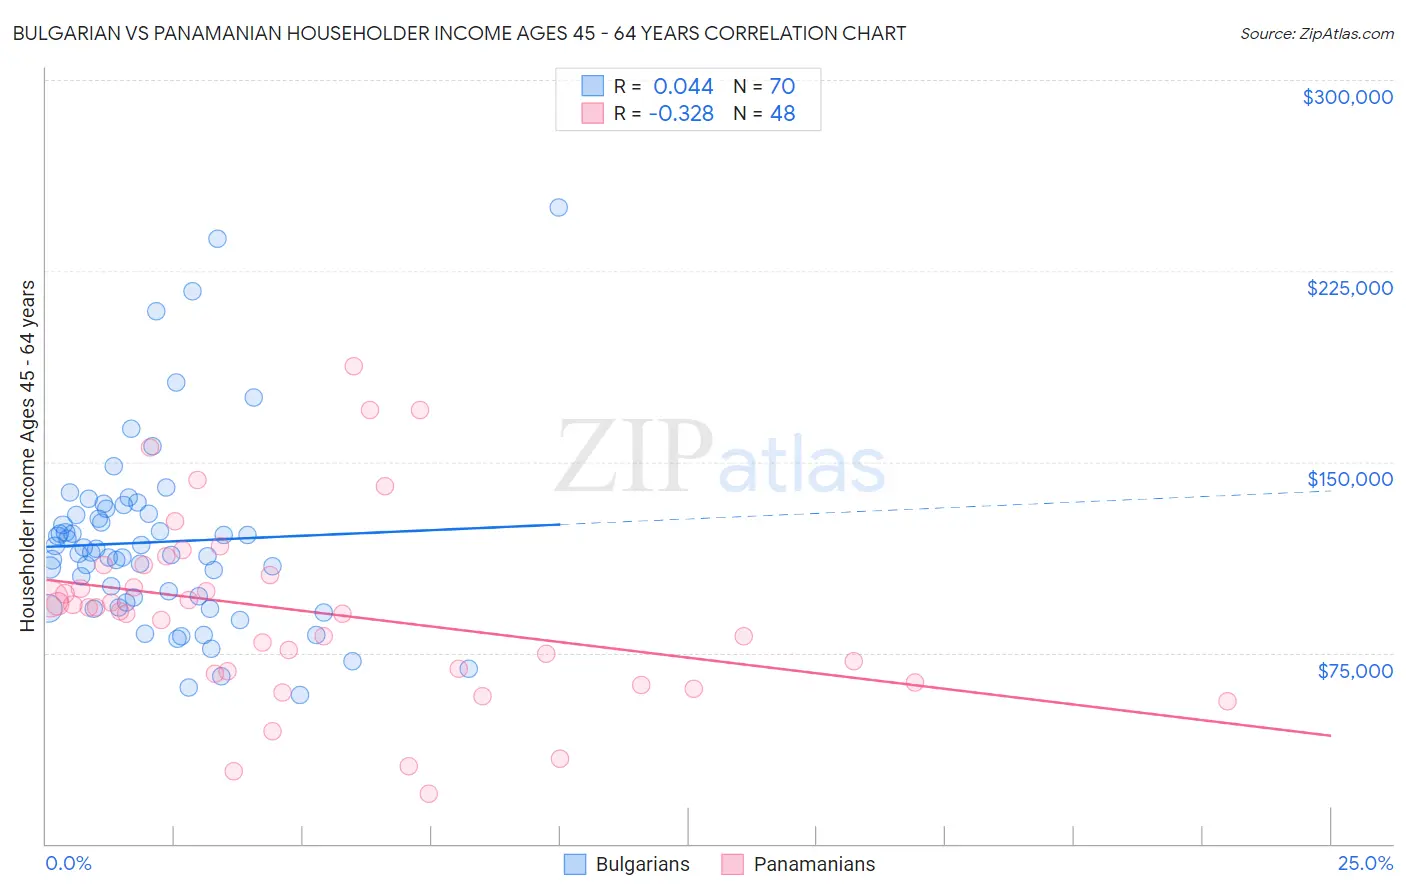 Bulgarian vs Panamanian Householder Income Ages 45 - 64 years